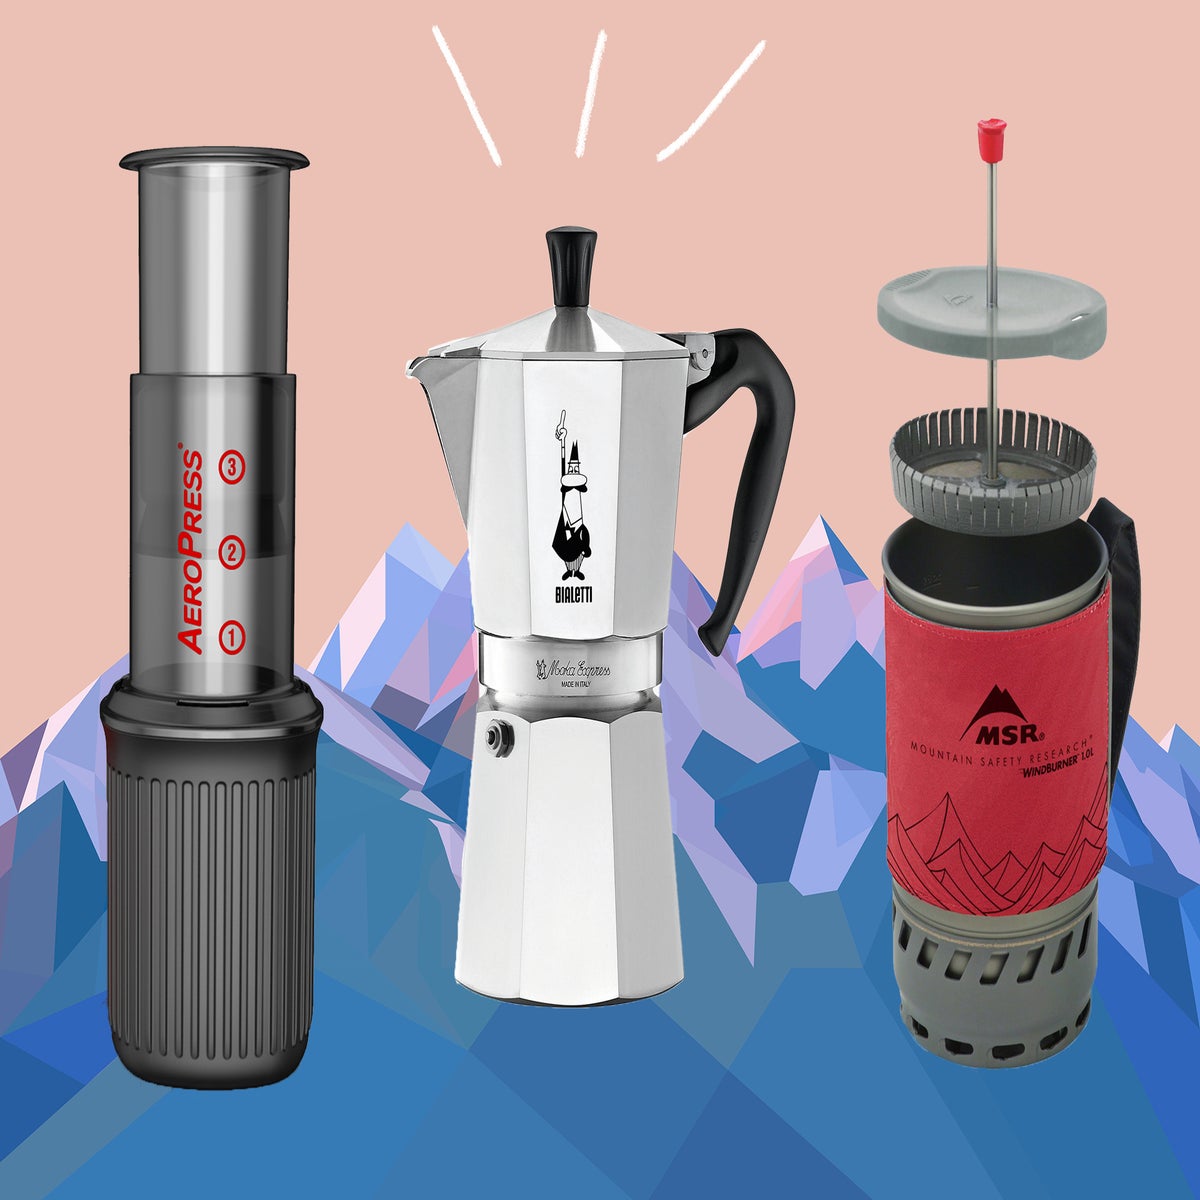 https://static.independent.co.uk/2020/09/29/11/indybest%20best%20portable%20coffee%20maker%20camping.jpg?width=1200&height=1200&fit=crop